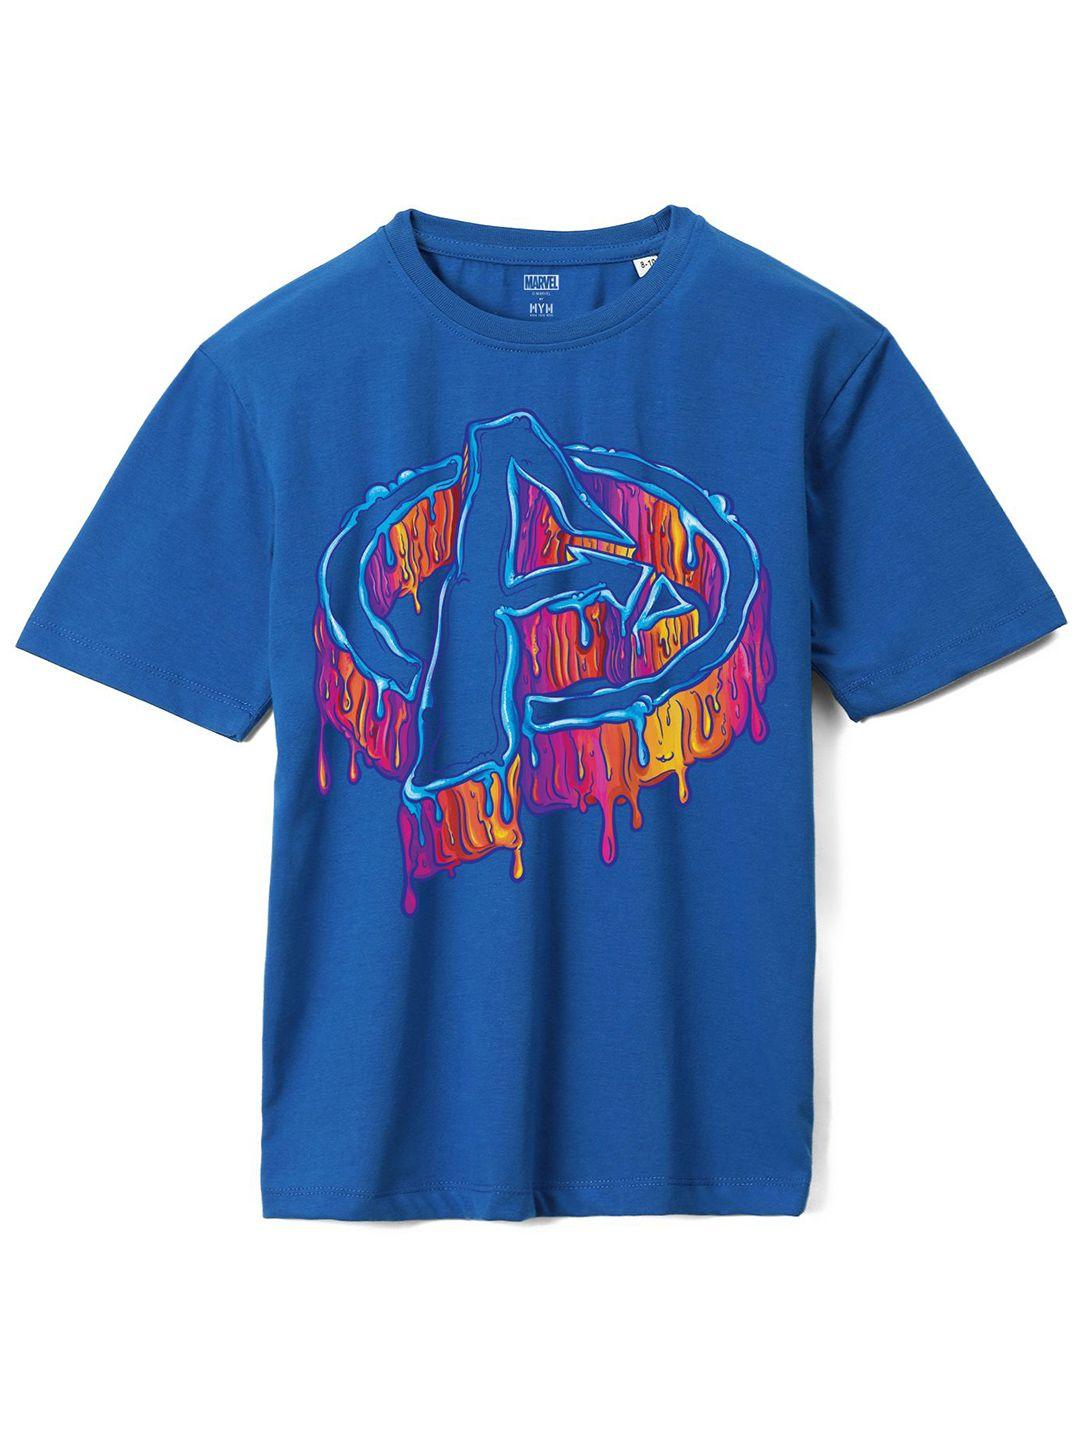 wear your mind boys avengers printed pure cotton oversized t-shirt